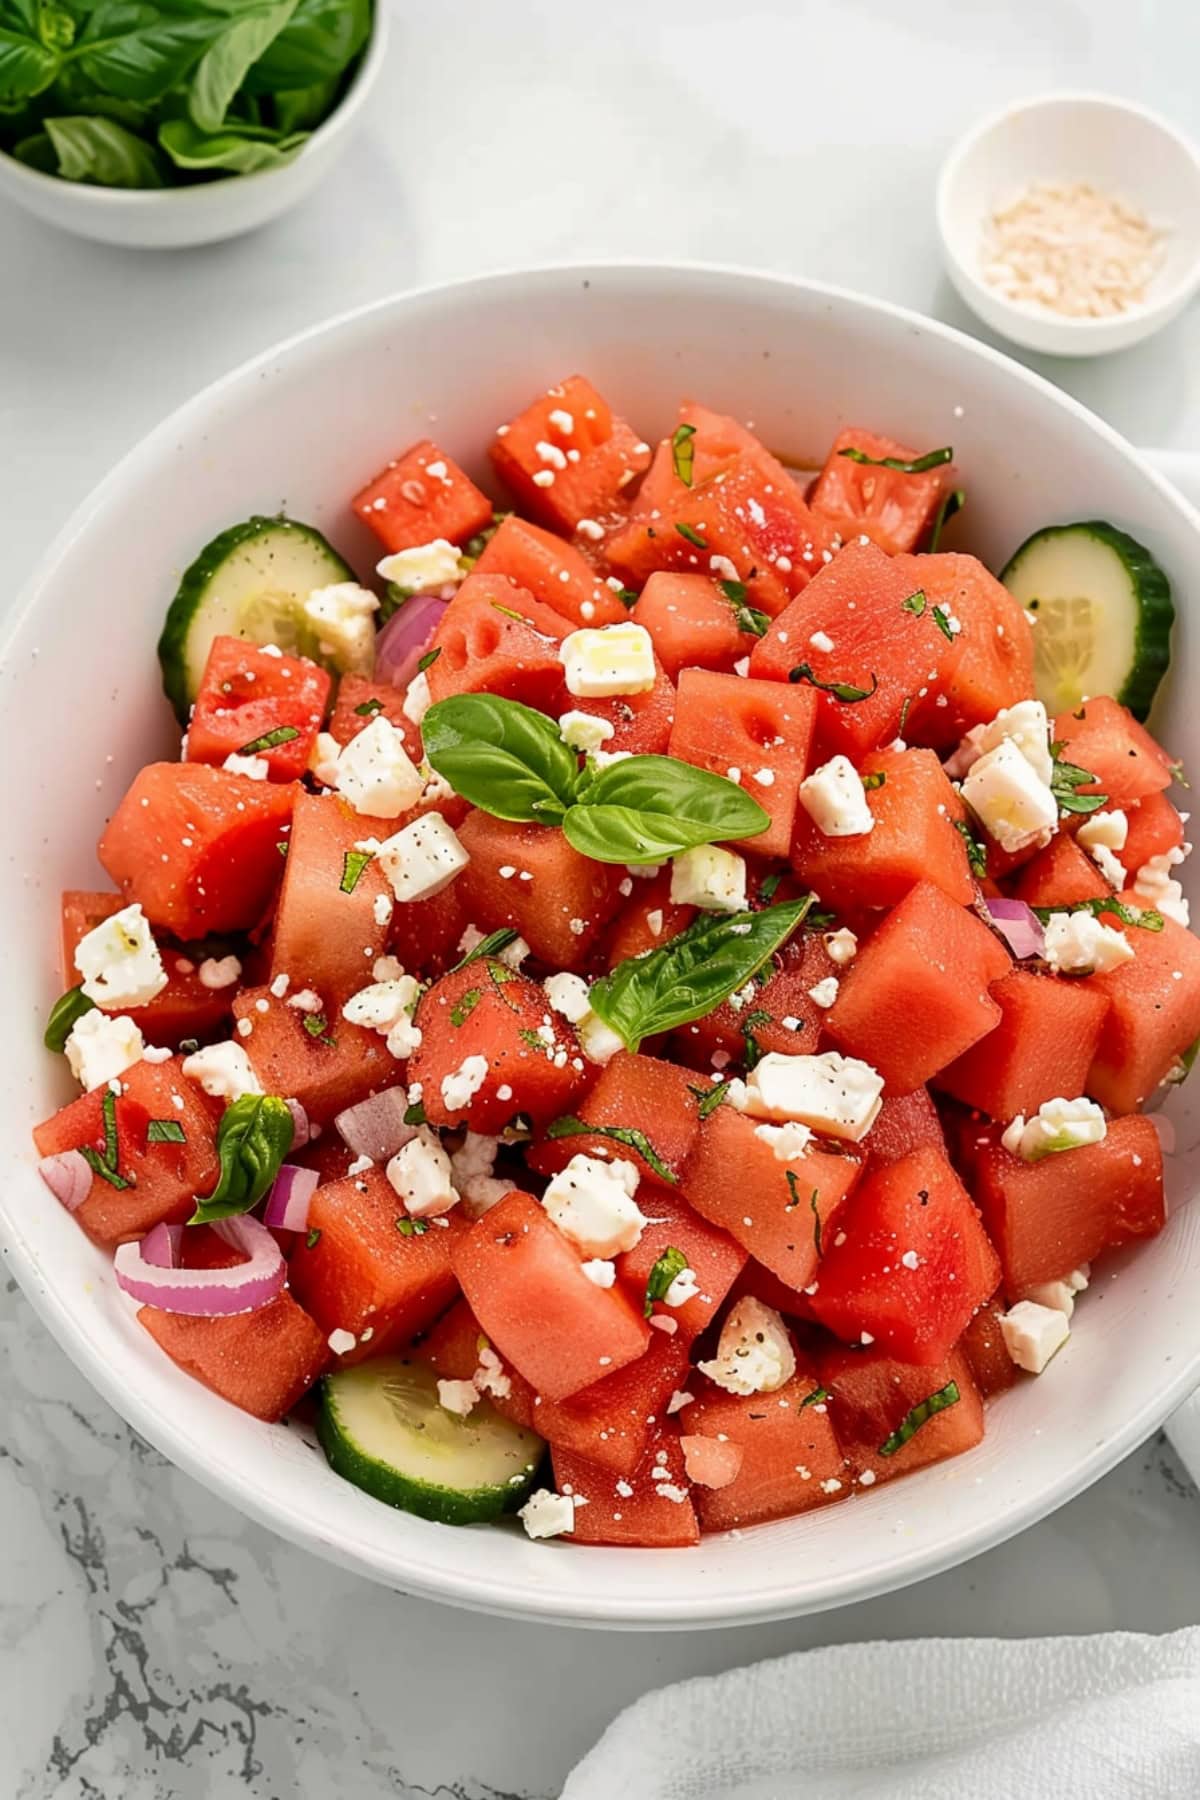 A refreshing summer salad made with sweet watermelon chunks, tangy feta cheese, and garnished with basil, served in a white bowl.